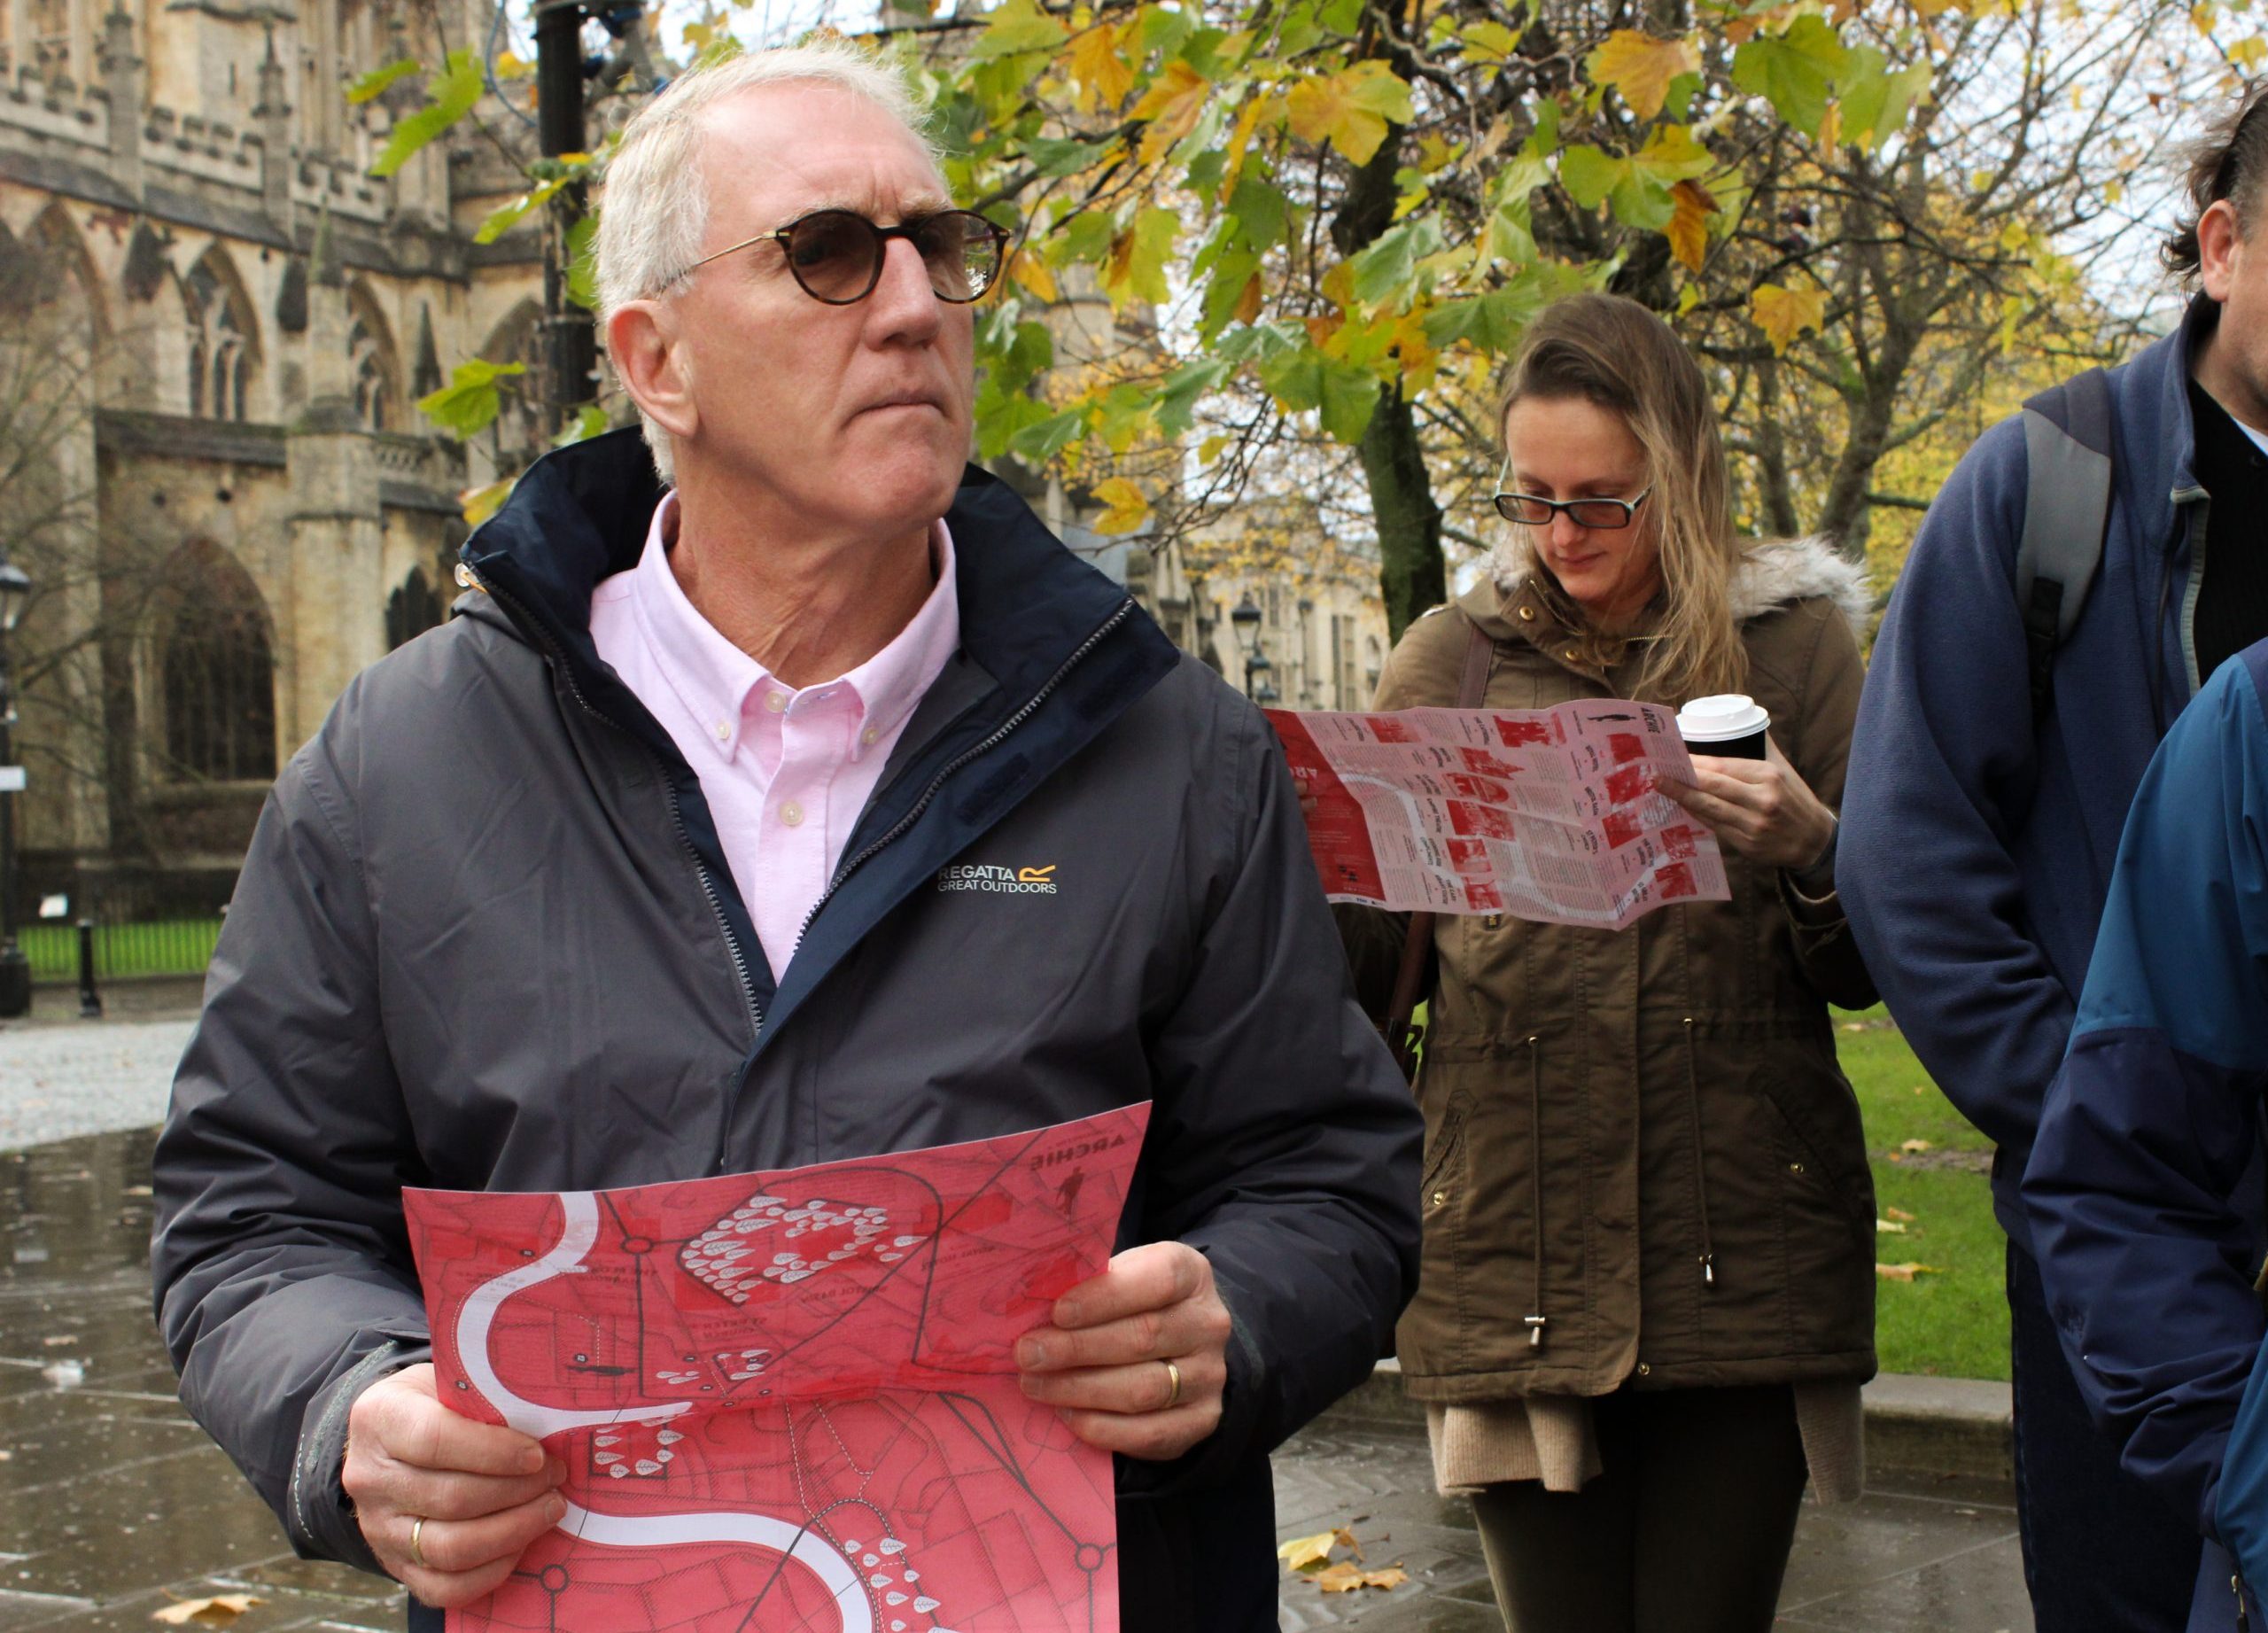 Participants in the Looking For Archie walking tour on College Green holding red maps